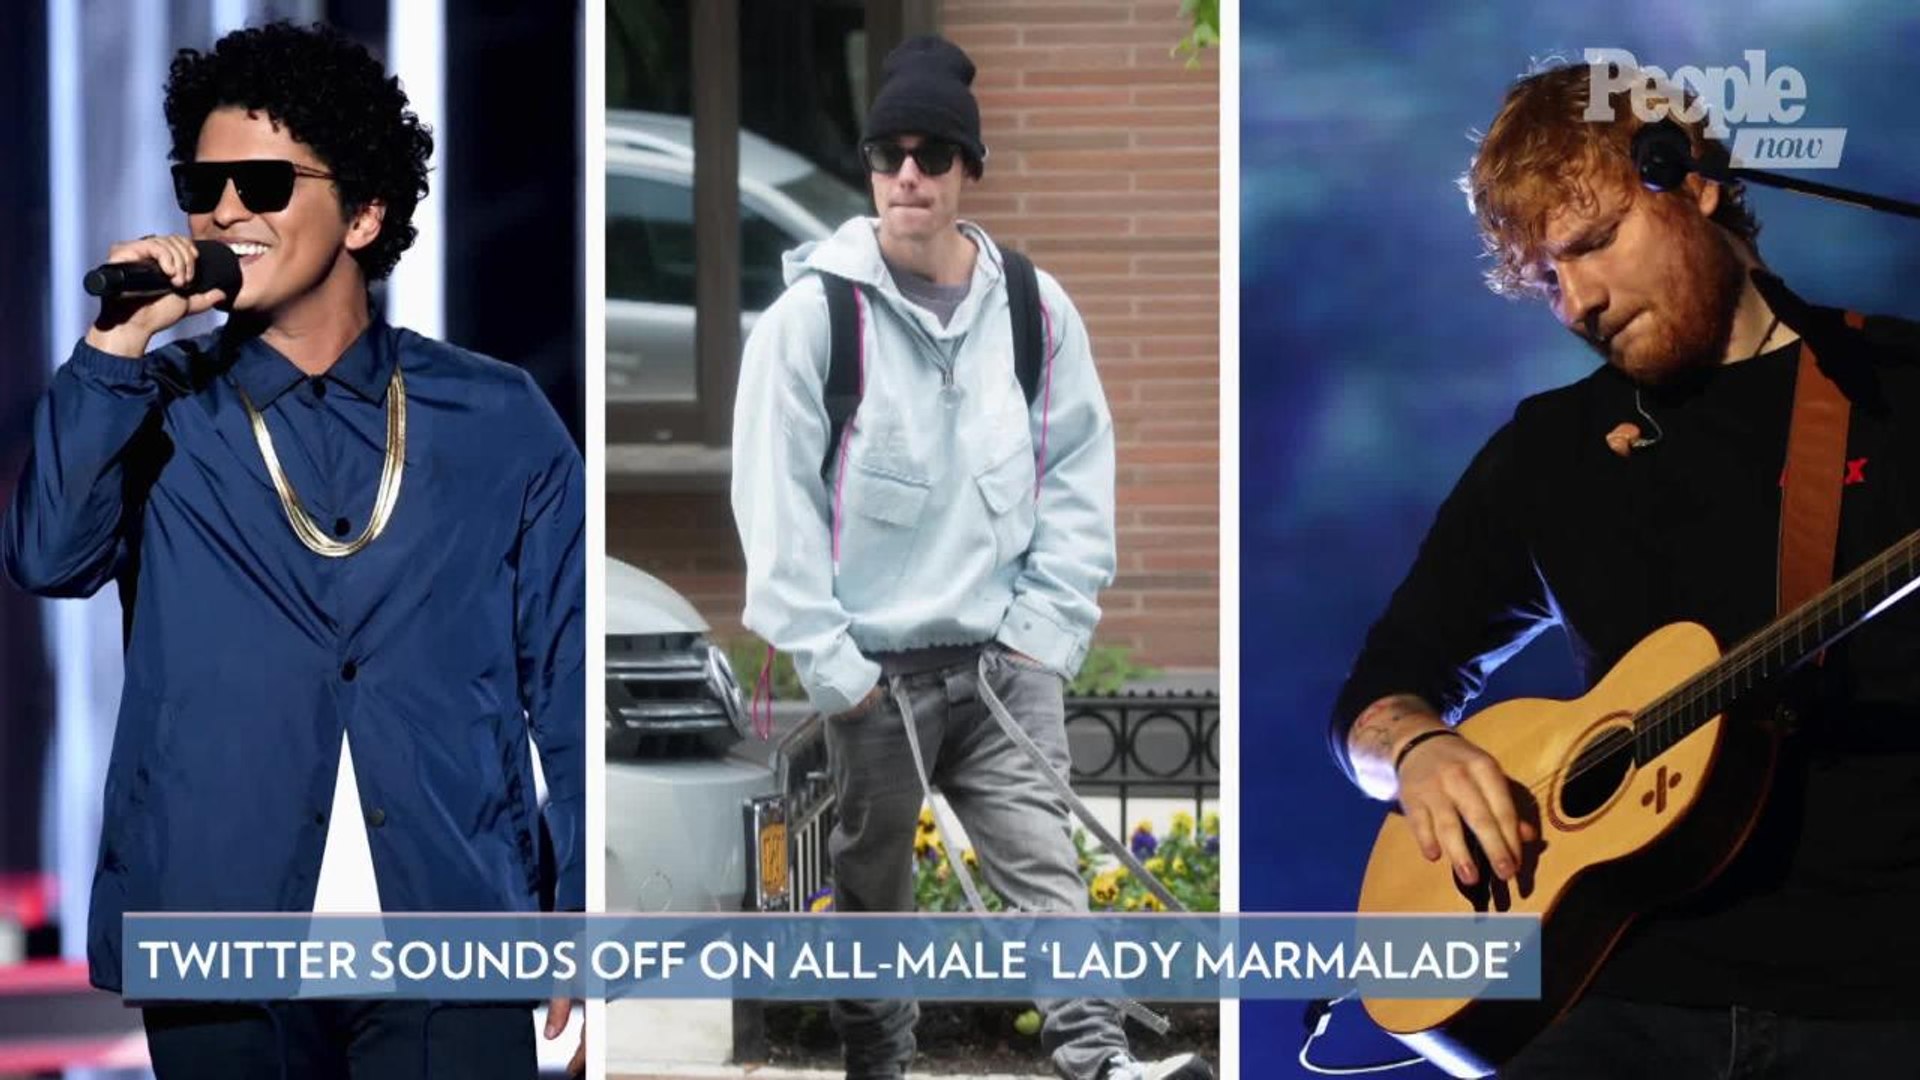 Ed Sheeran Thought About Making All-Male Version of 'Lady Marmalade' with Bruno Mars, Just